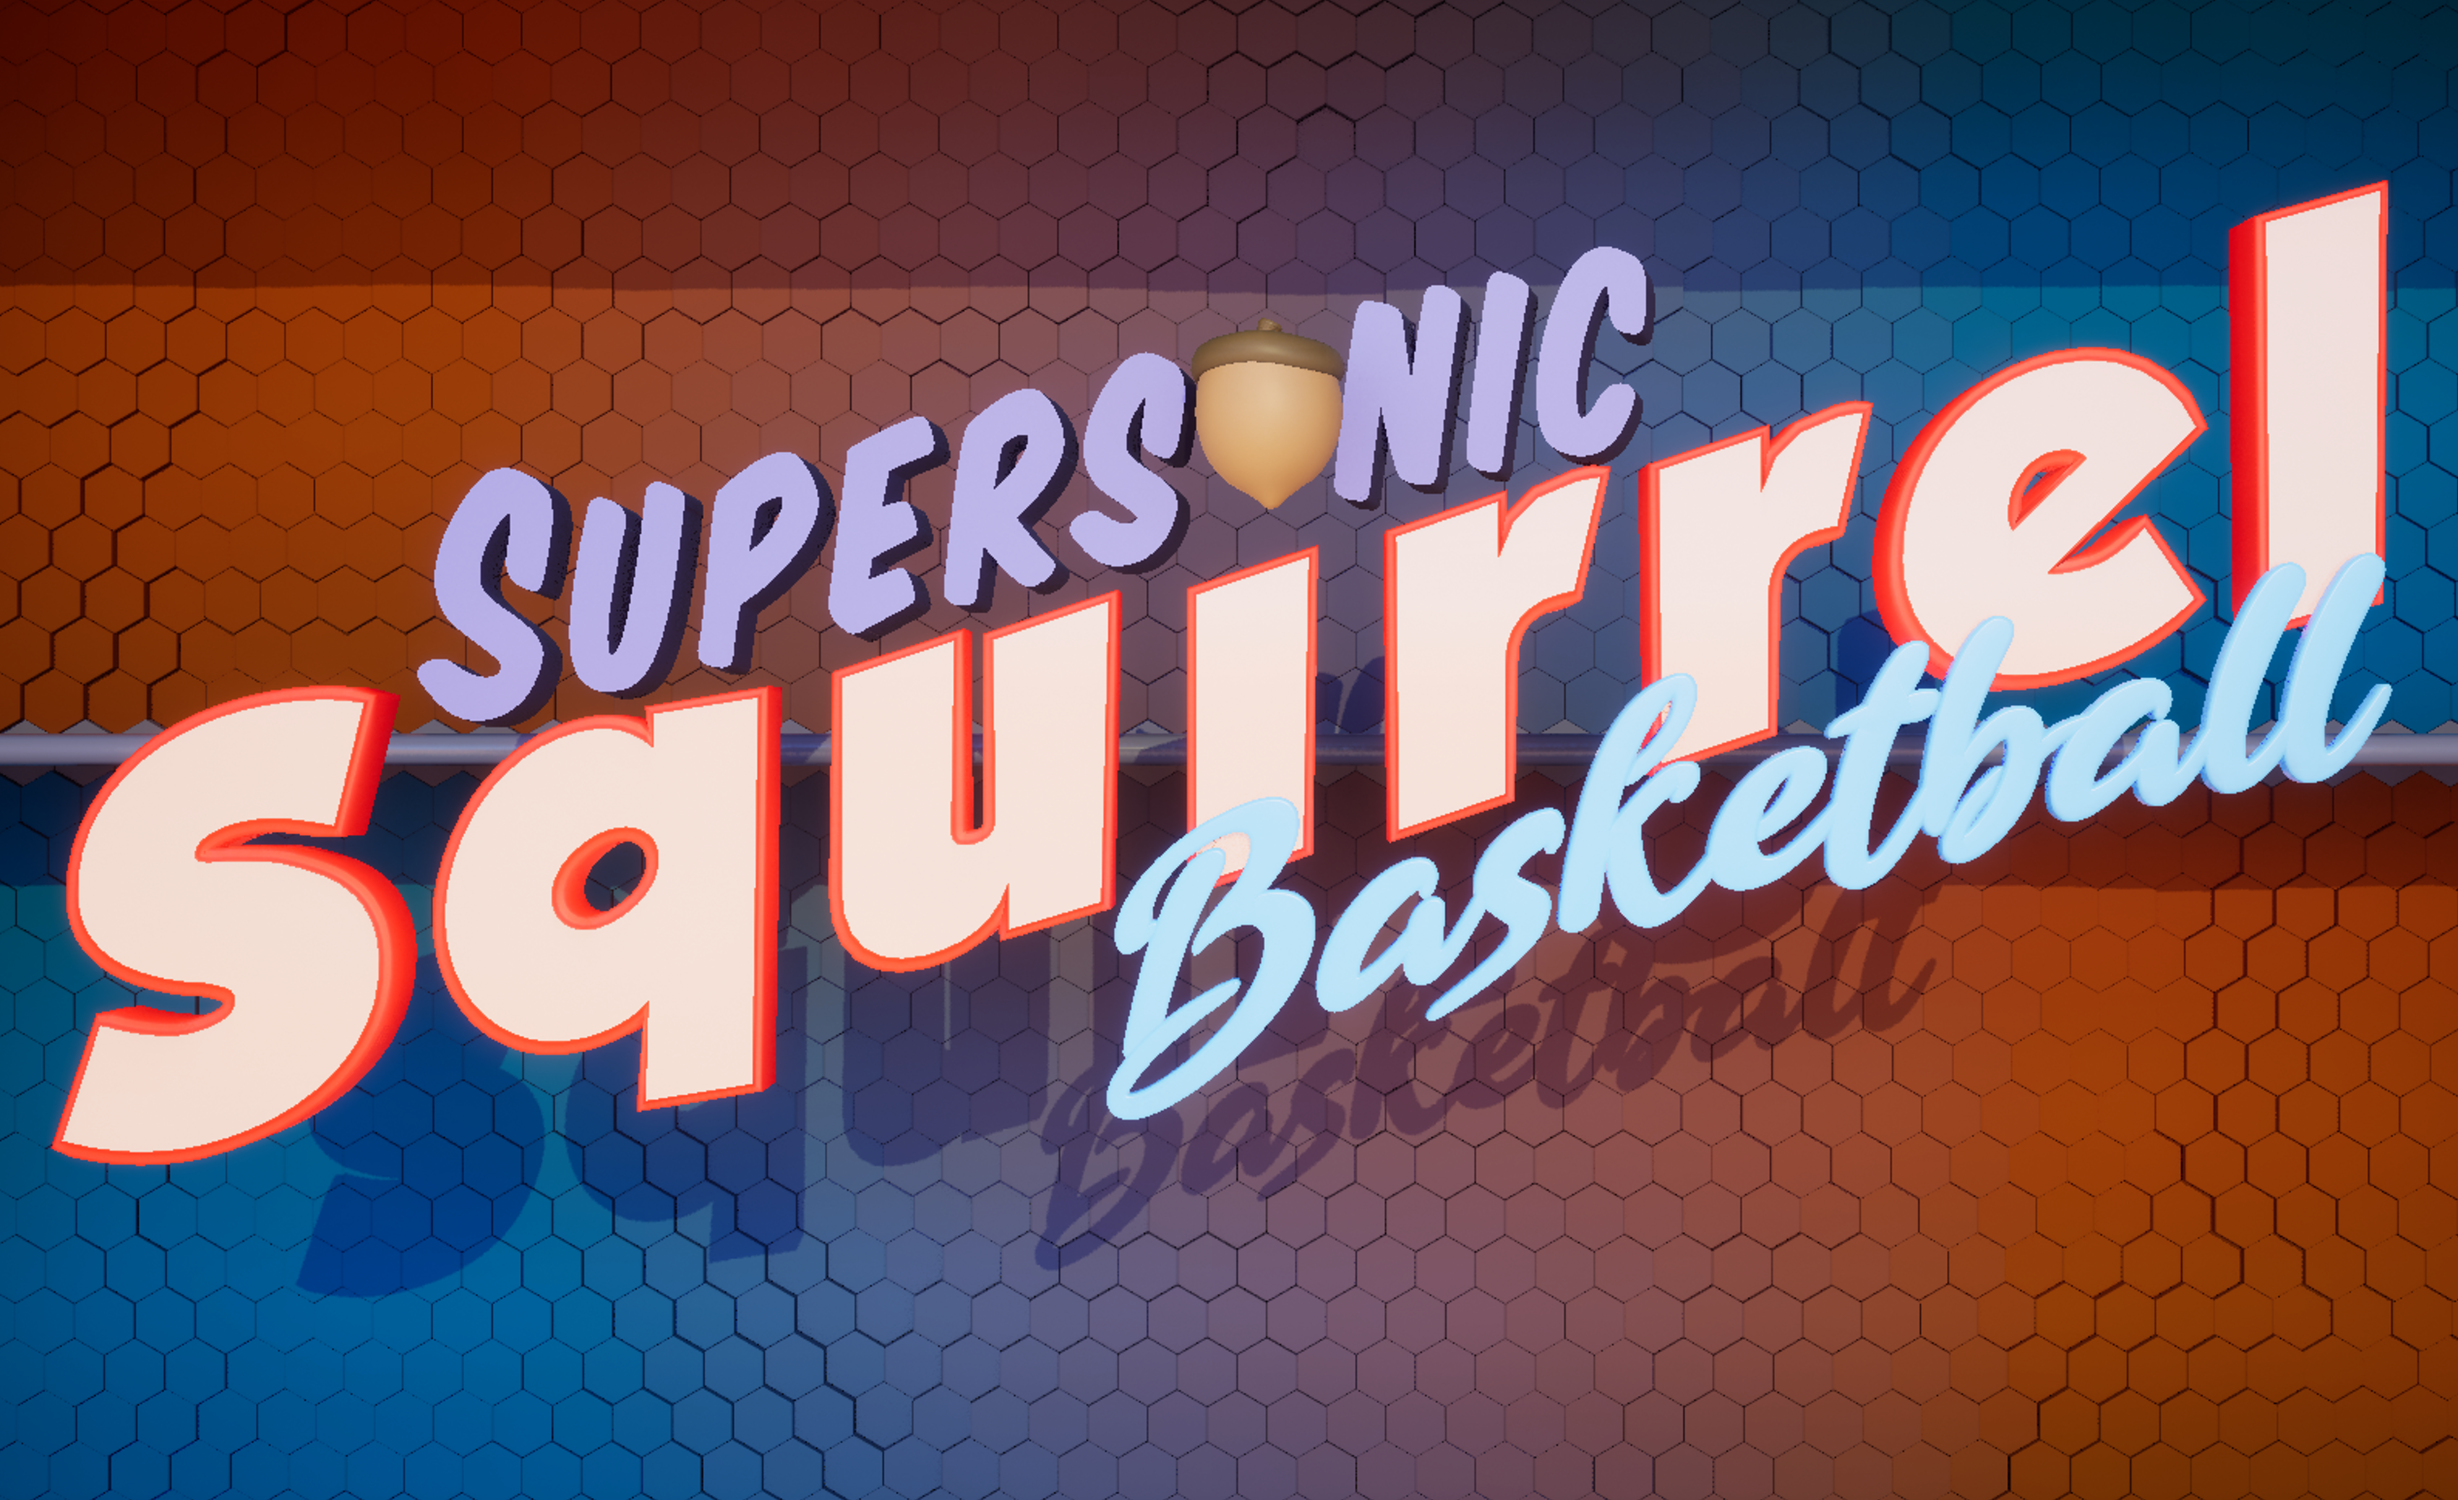 Supersonic Squirrel Basketball